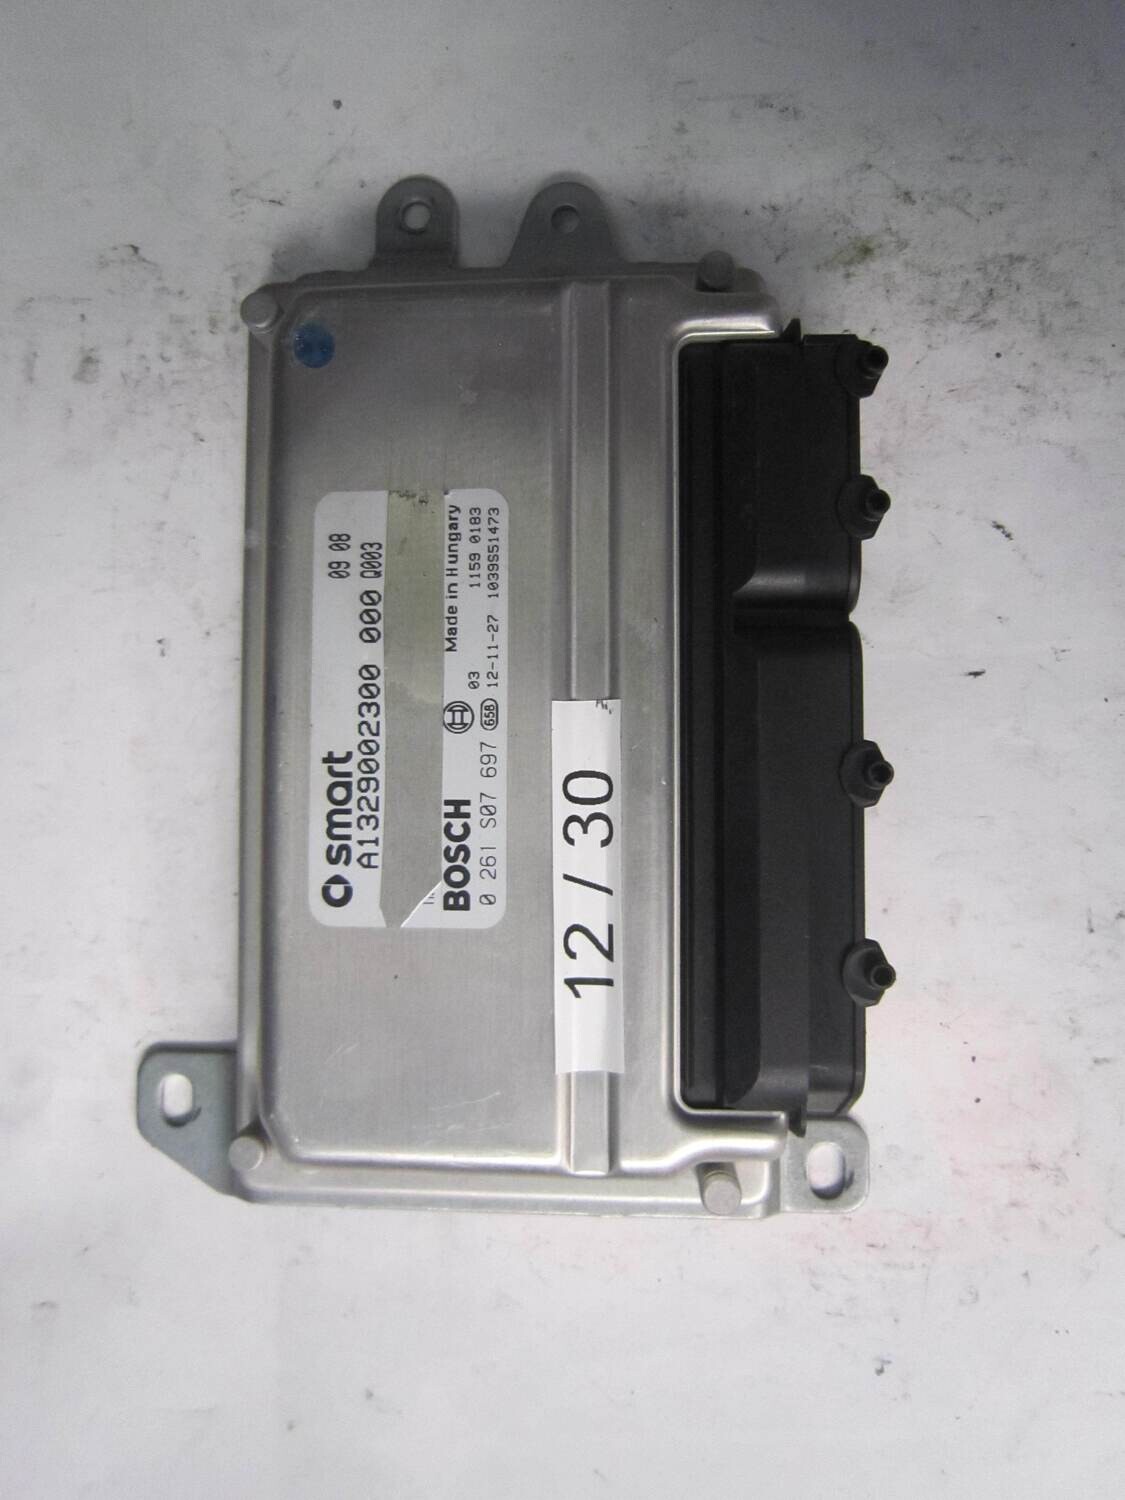 12-30 Centralina Motore Bosch 0261S07697 0 261 S07 697 A1329002300 1039S51473 SMART FORTWO 1.0